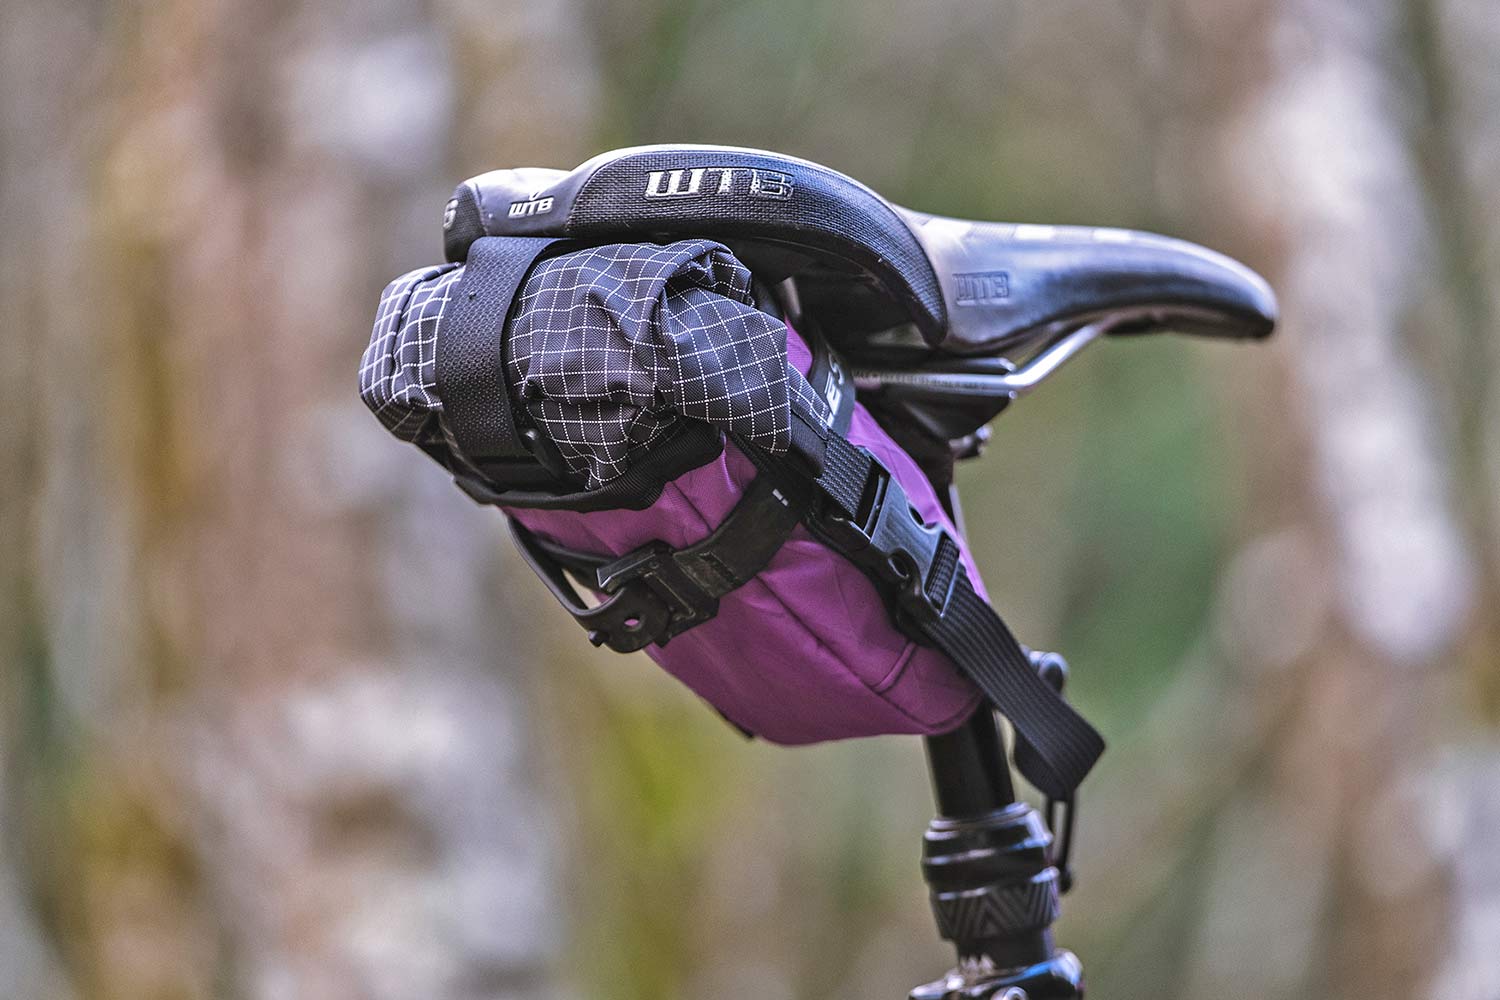 Swift Every Day Caddy unique saddlebag, plus Swift Campout! - Bikerumor